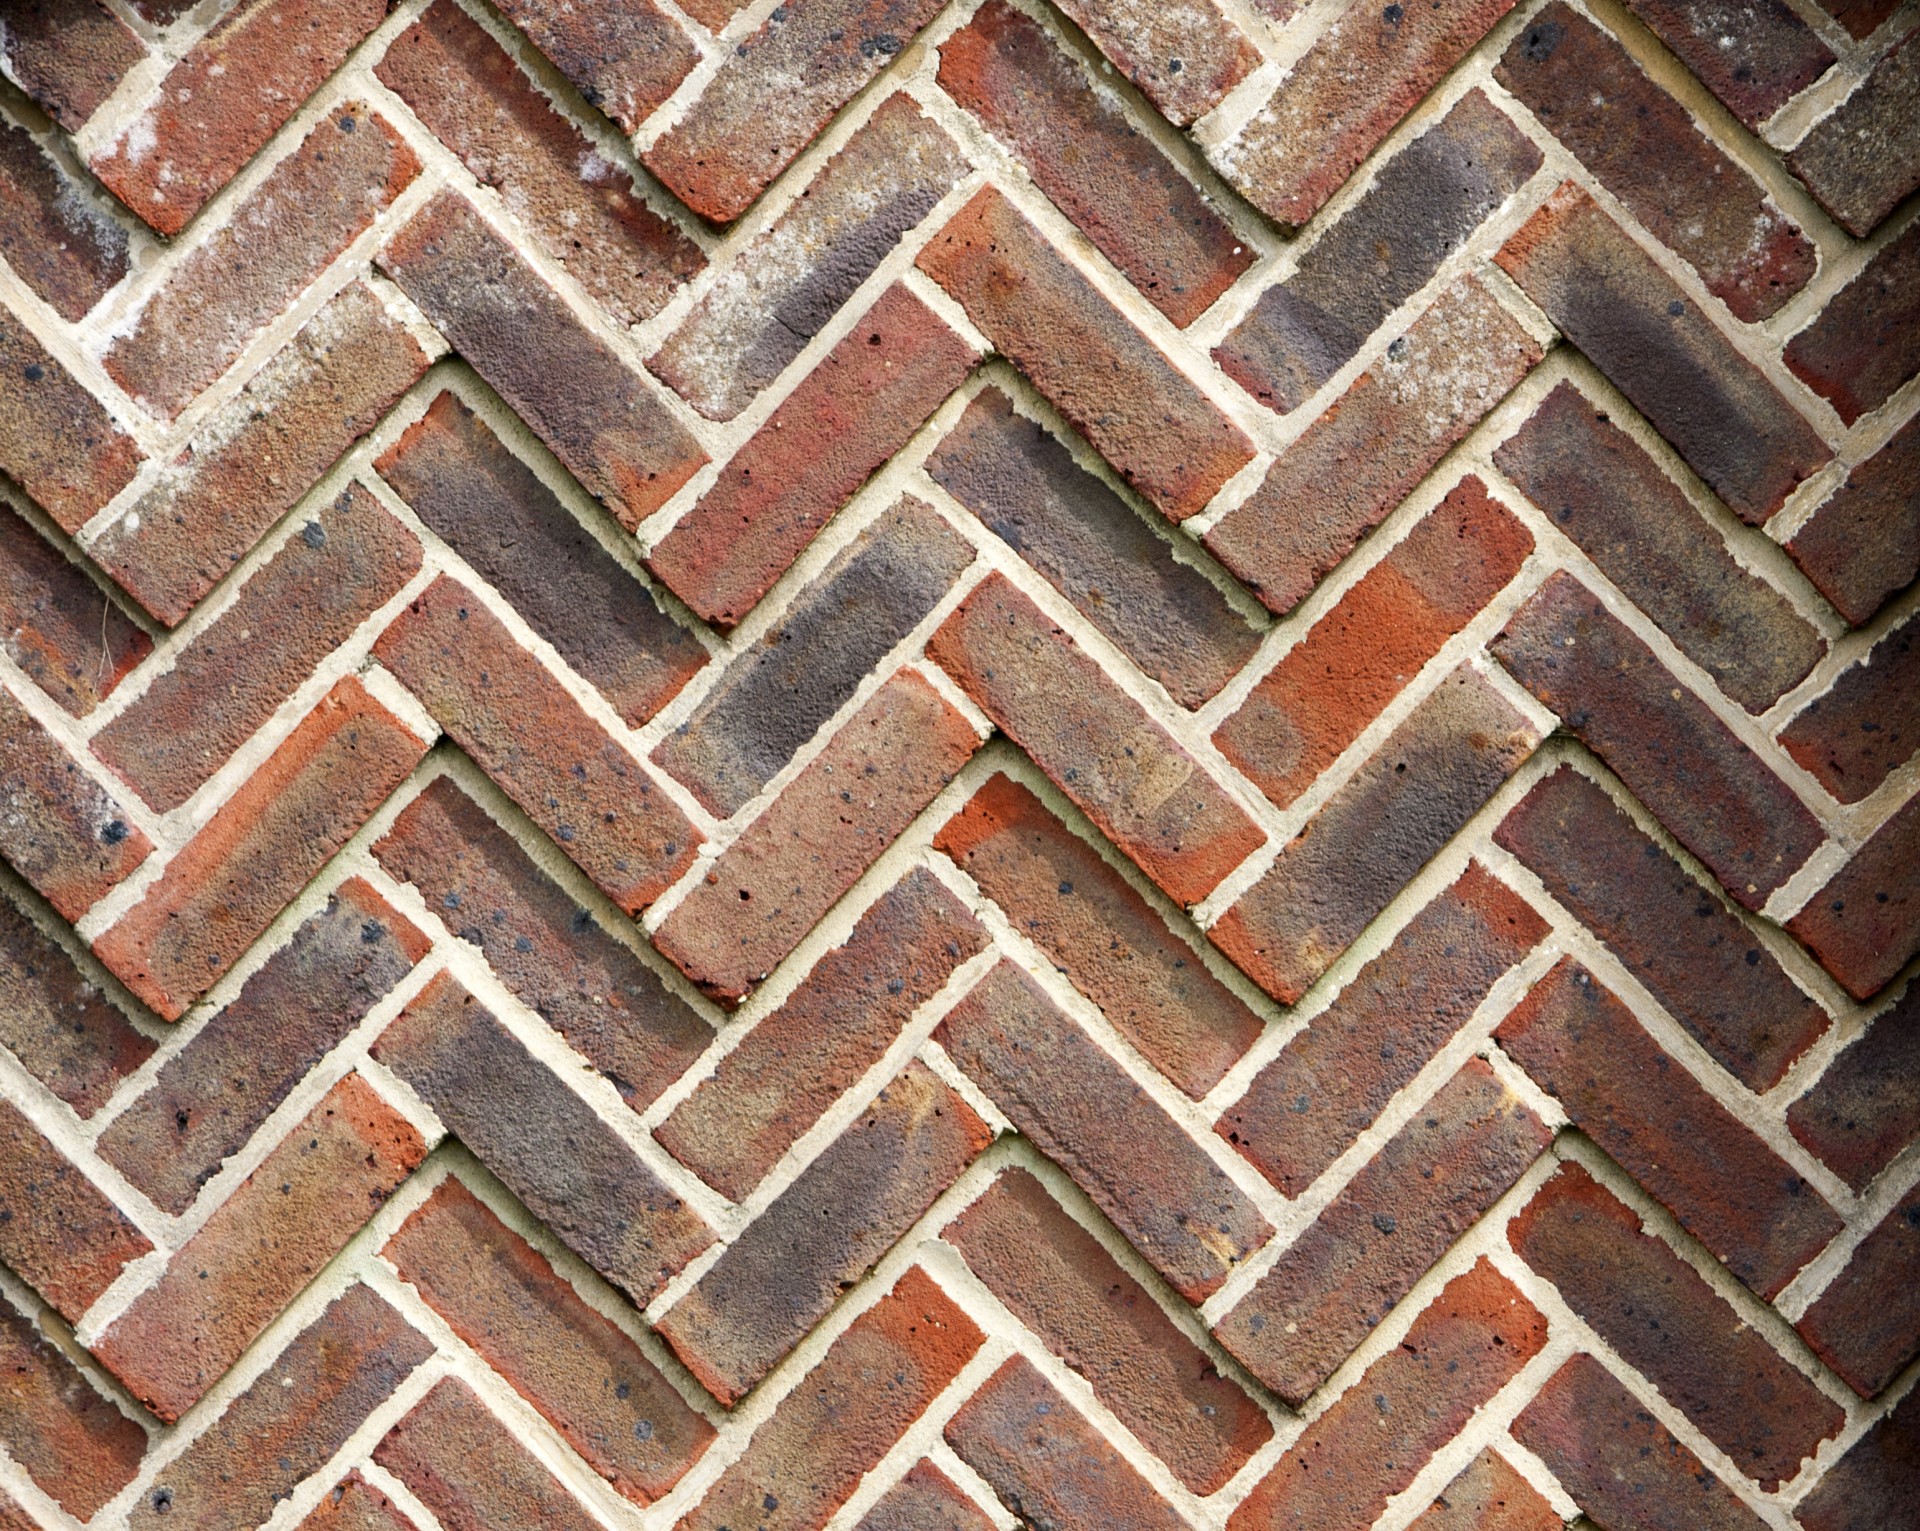 brick-wall-background-free-stock-photo-public-domain-pictures